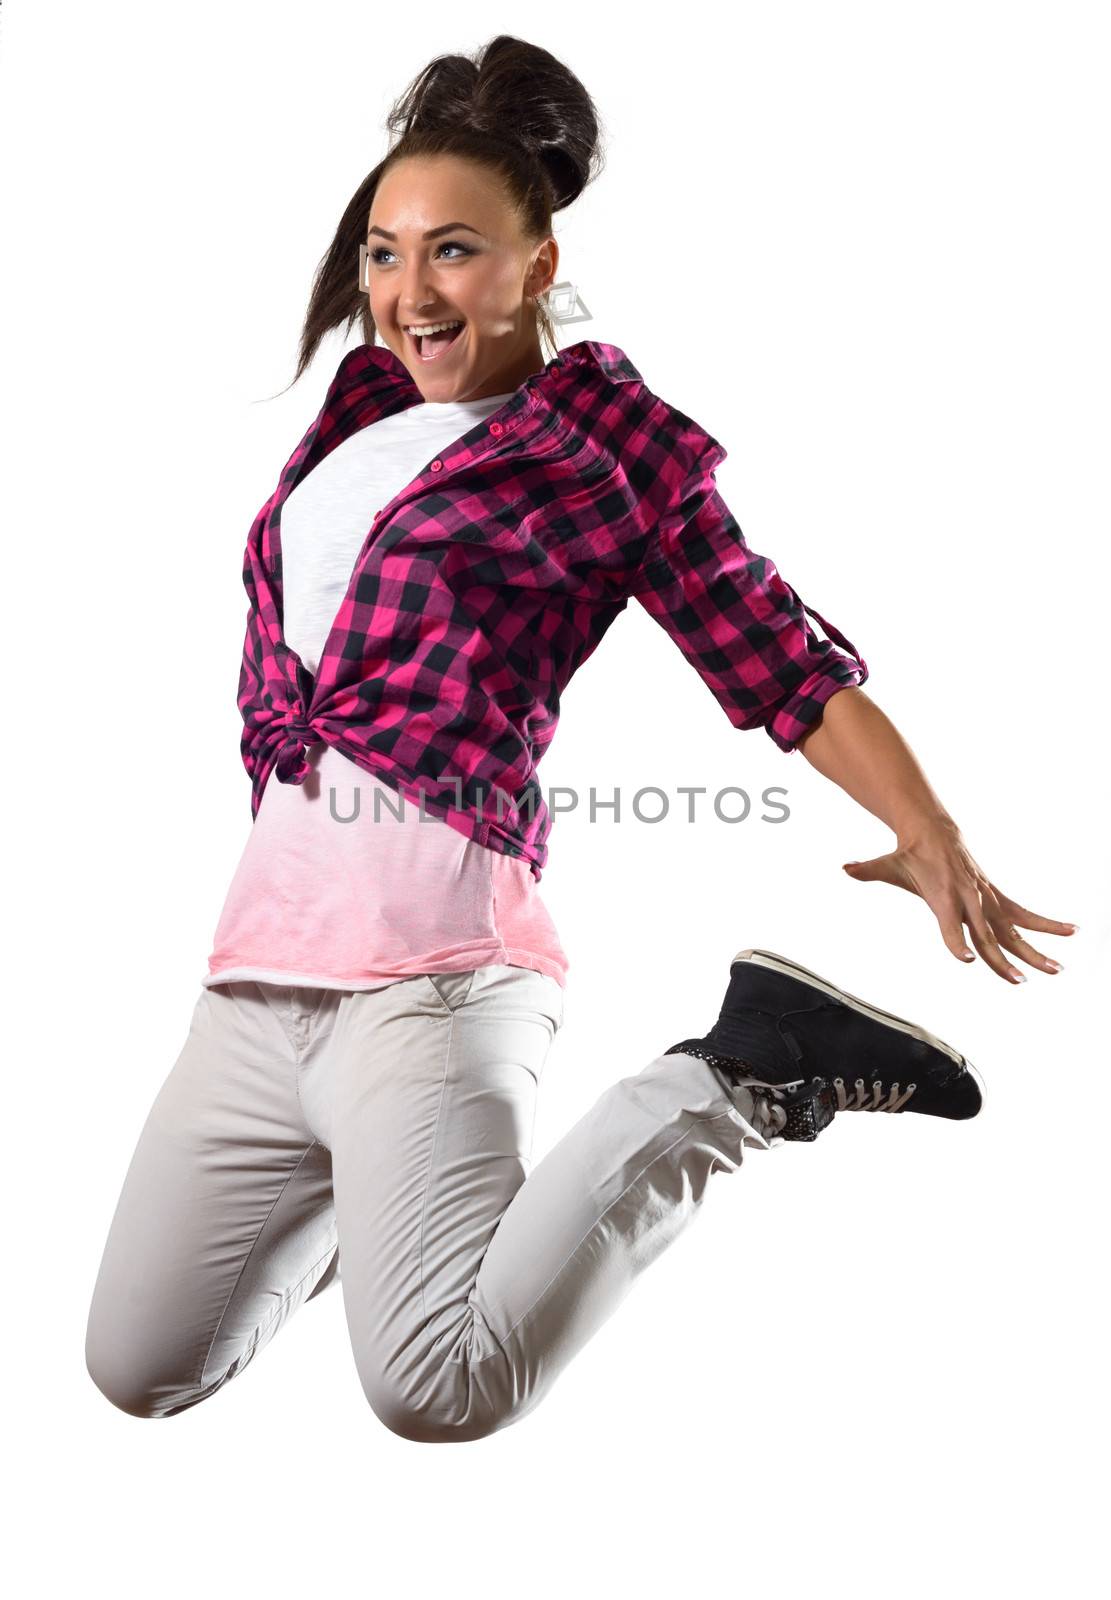 Young woman dancer jumping isolated on white